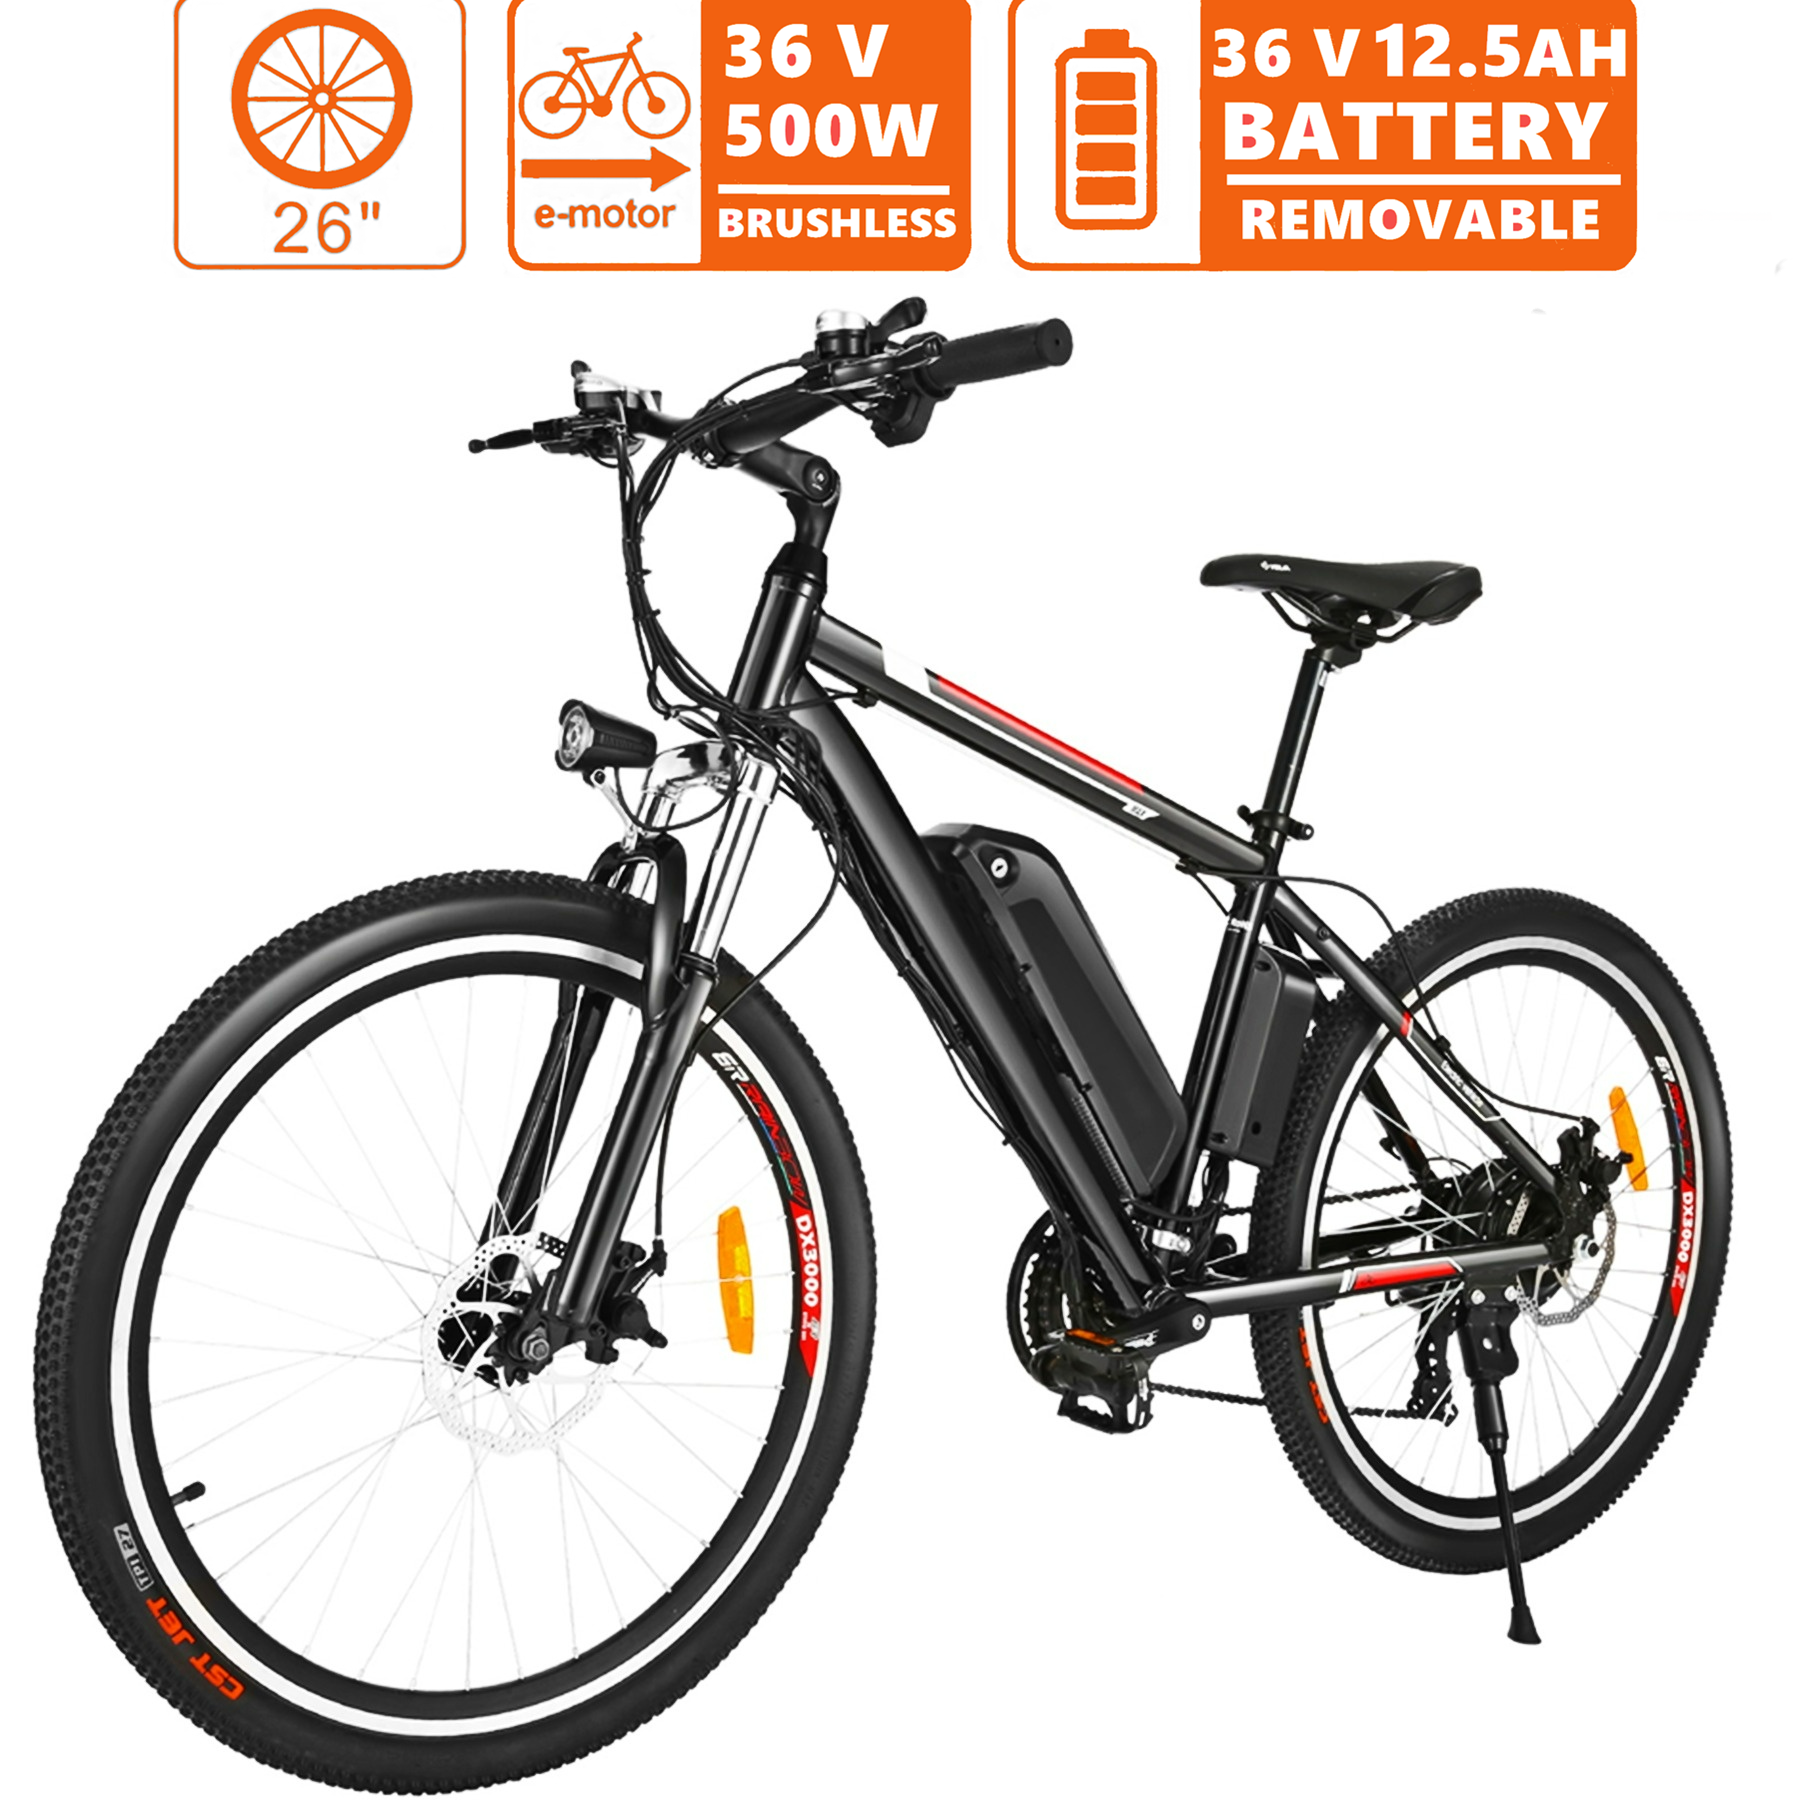 Generic 26 In. Electric Mountain Bike Aluminum Alloy Frame Cycling Electric Bicycle with 500W Motor and Removable 12.5Ah Lithium-Ion Battery for Men Adults